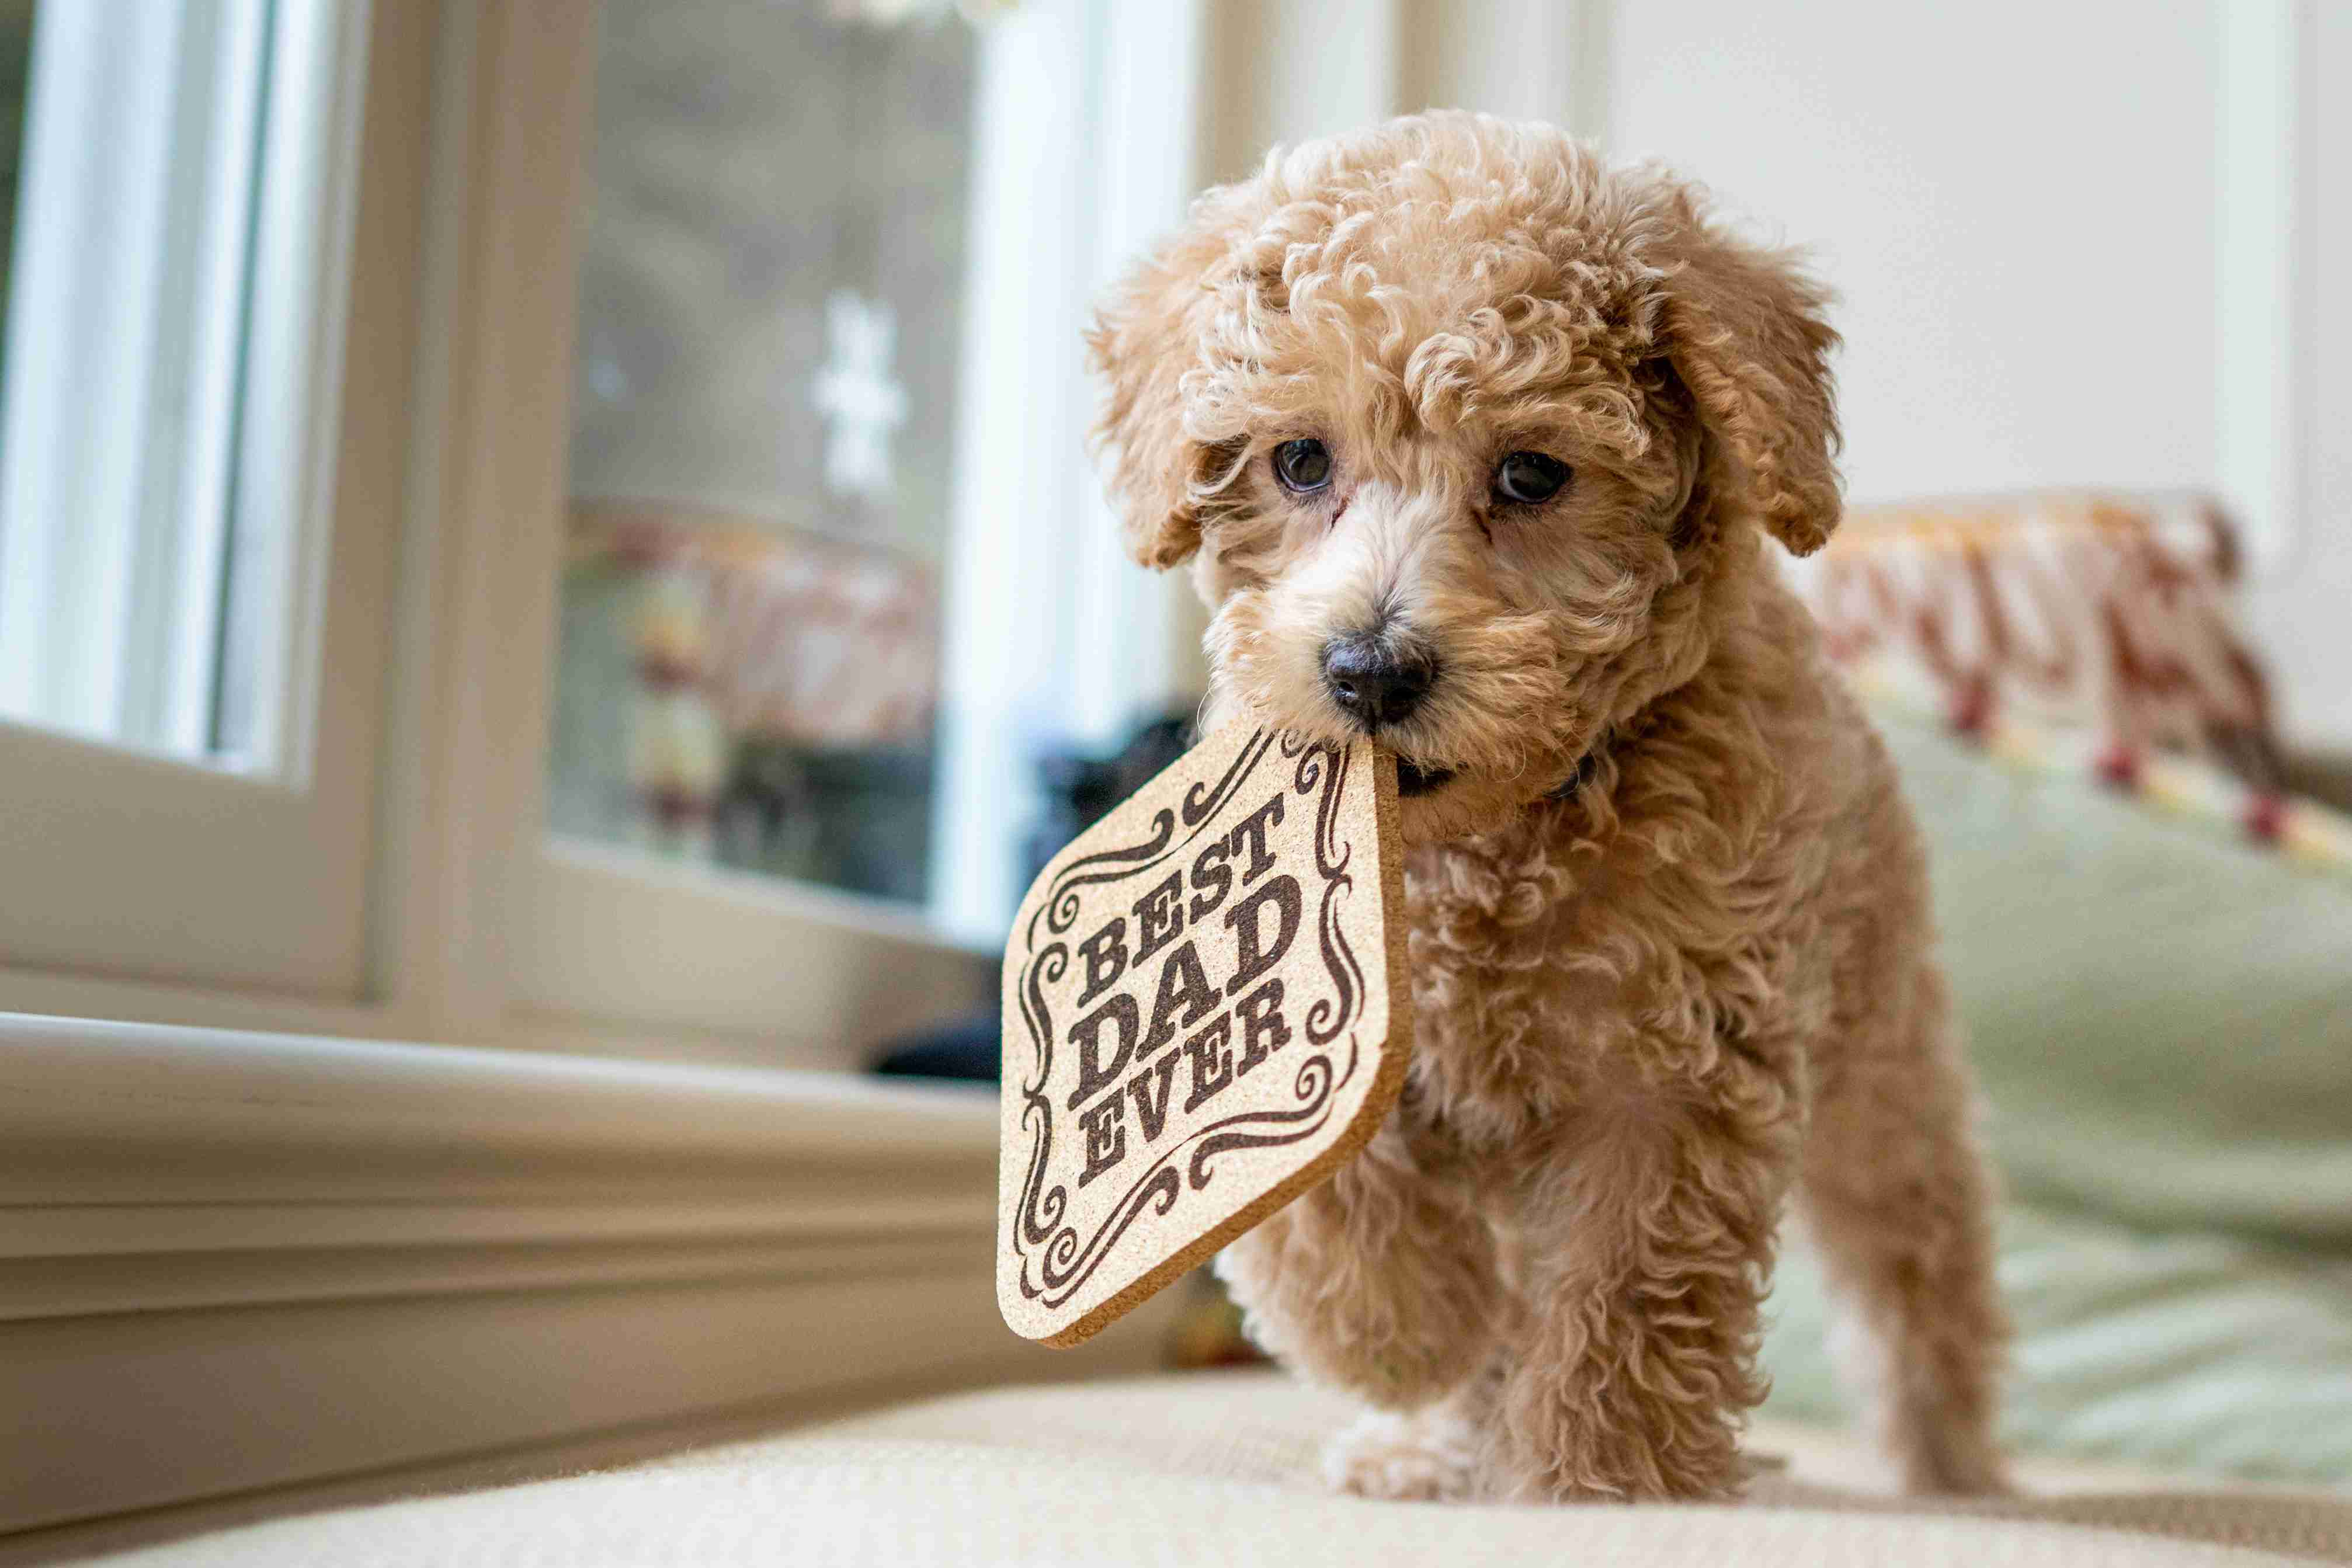 What are some important factors to consider when choosing a veterinarian for your Poodle puppy?